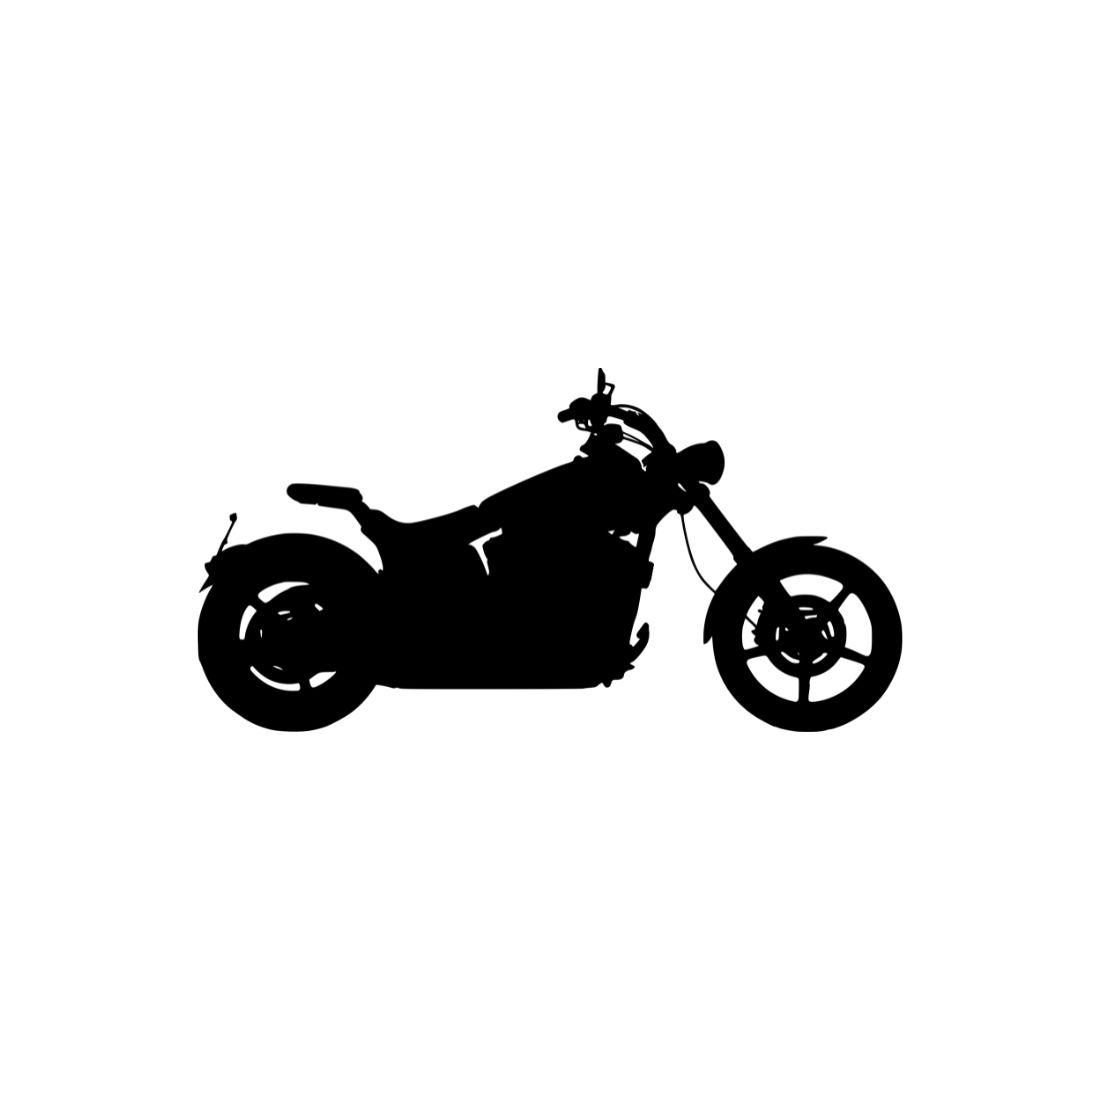 Motorcycle Black Silhouette Bundle Preview image.